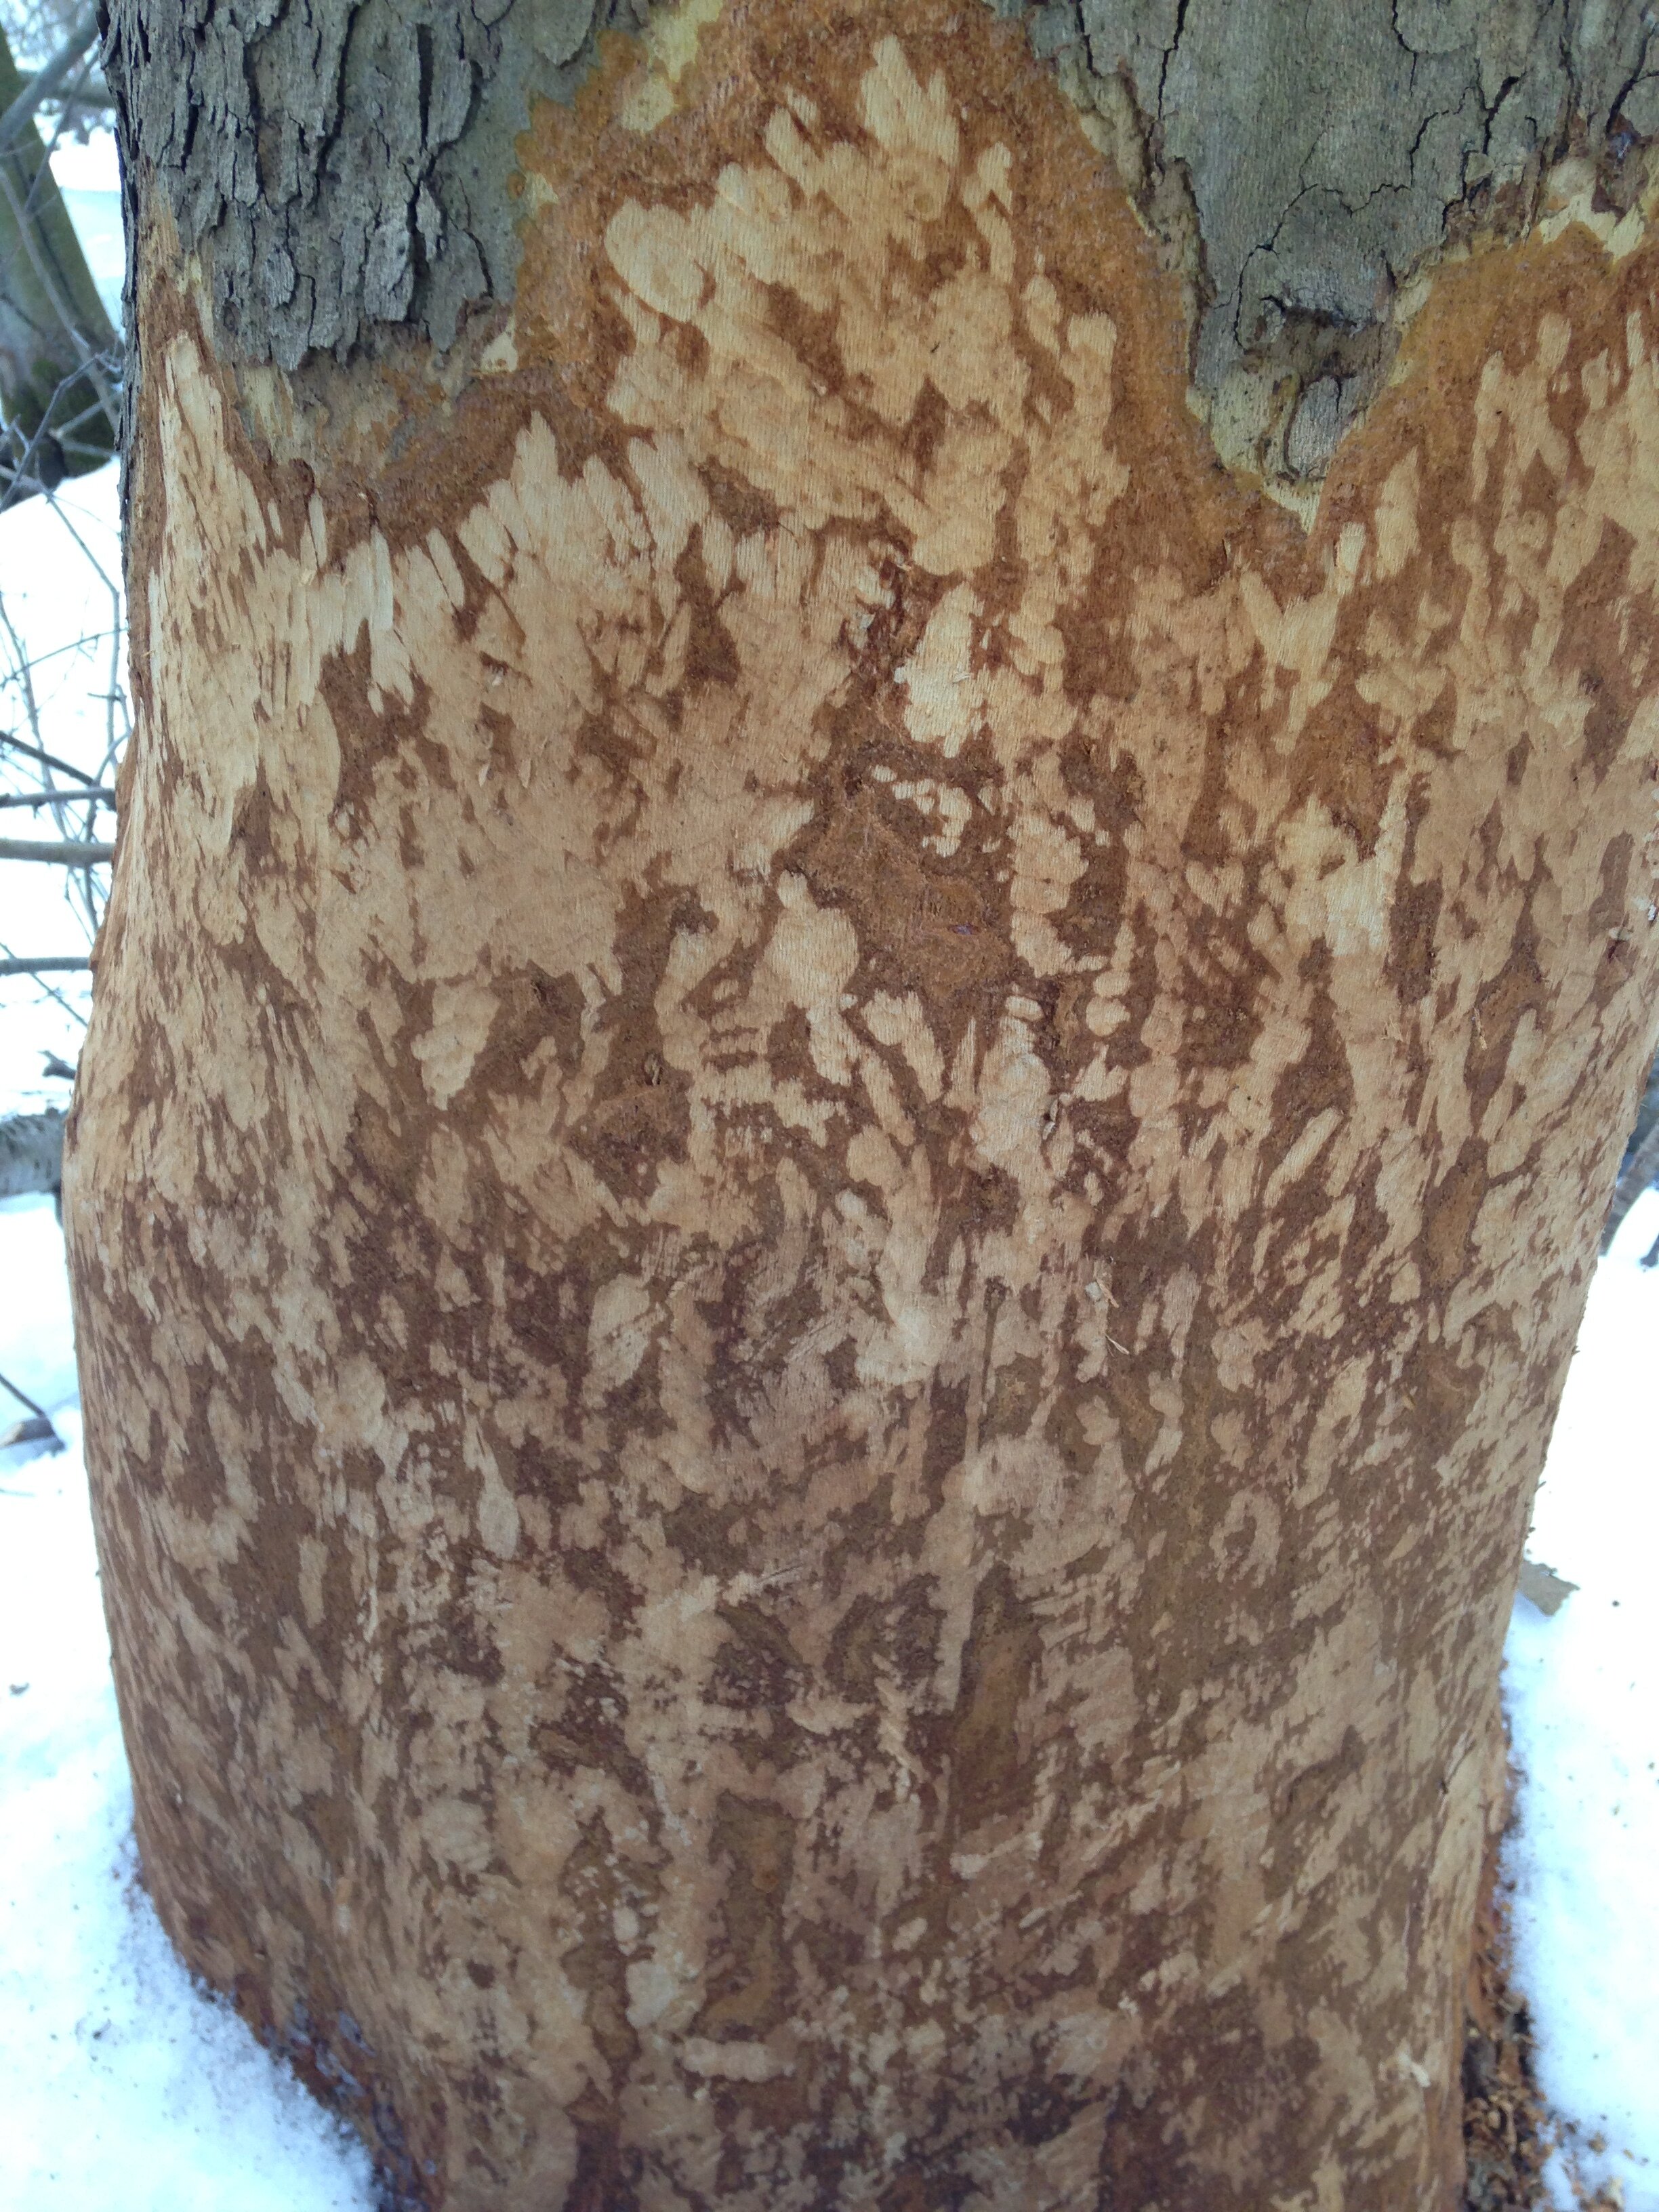 Incisor marks on the bottom of a Sycamore